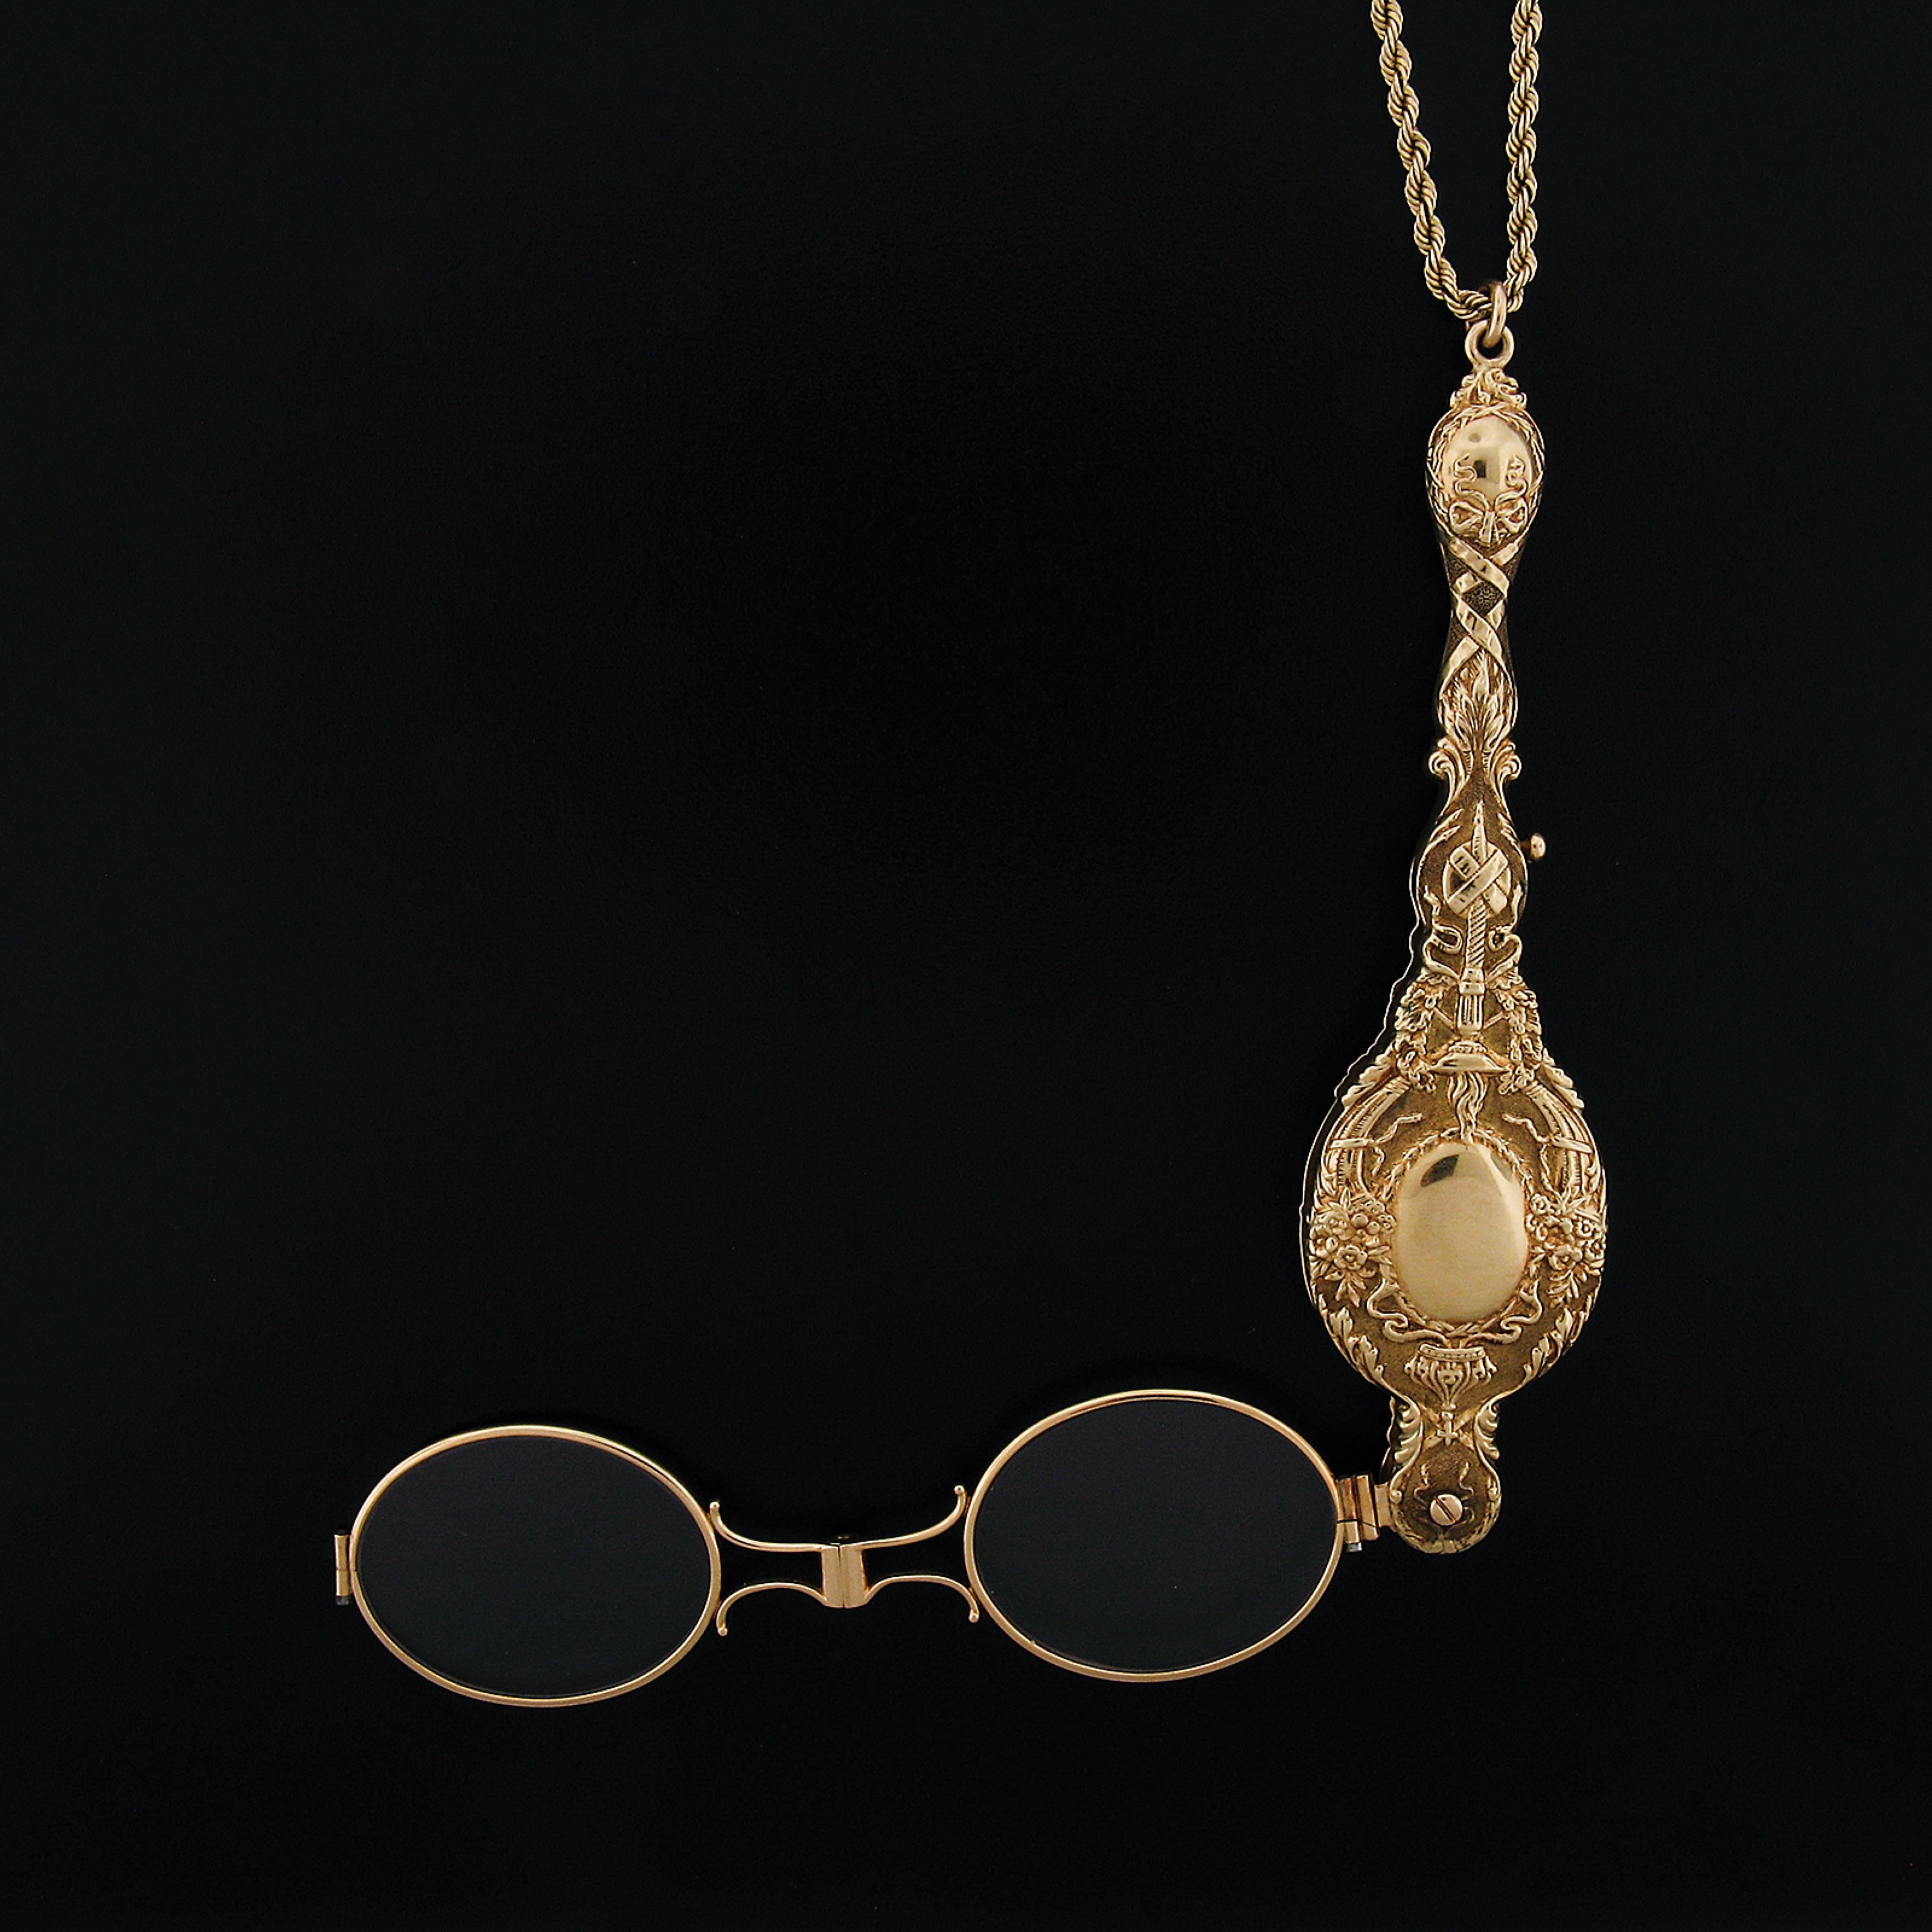 This vintage collectible lorgnette necklace is crafted in solid 14k yellow gold. It is very well detailed and features floral patterns throughout with an olympic style torch on both sides of the design. The lorgnette slides on a long, 35 inches rope